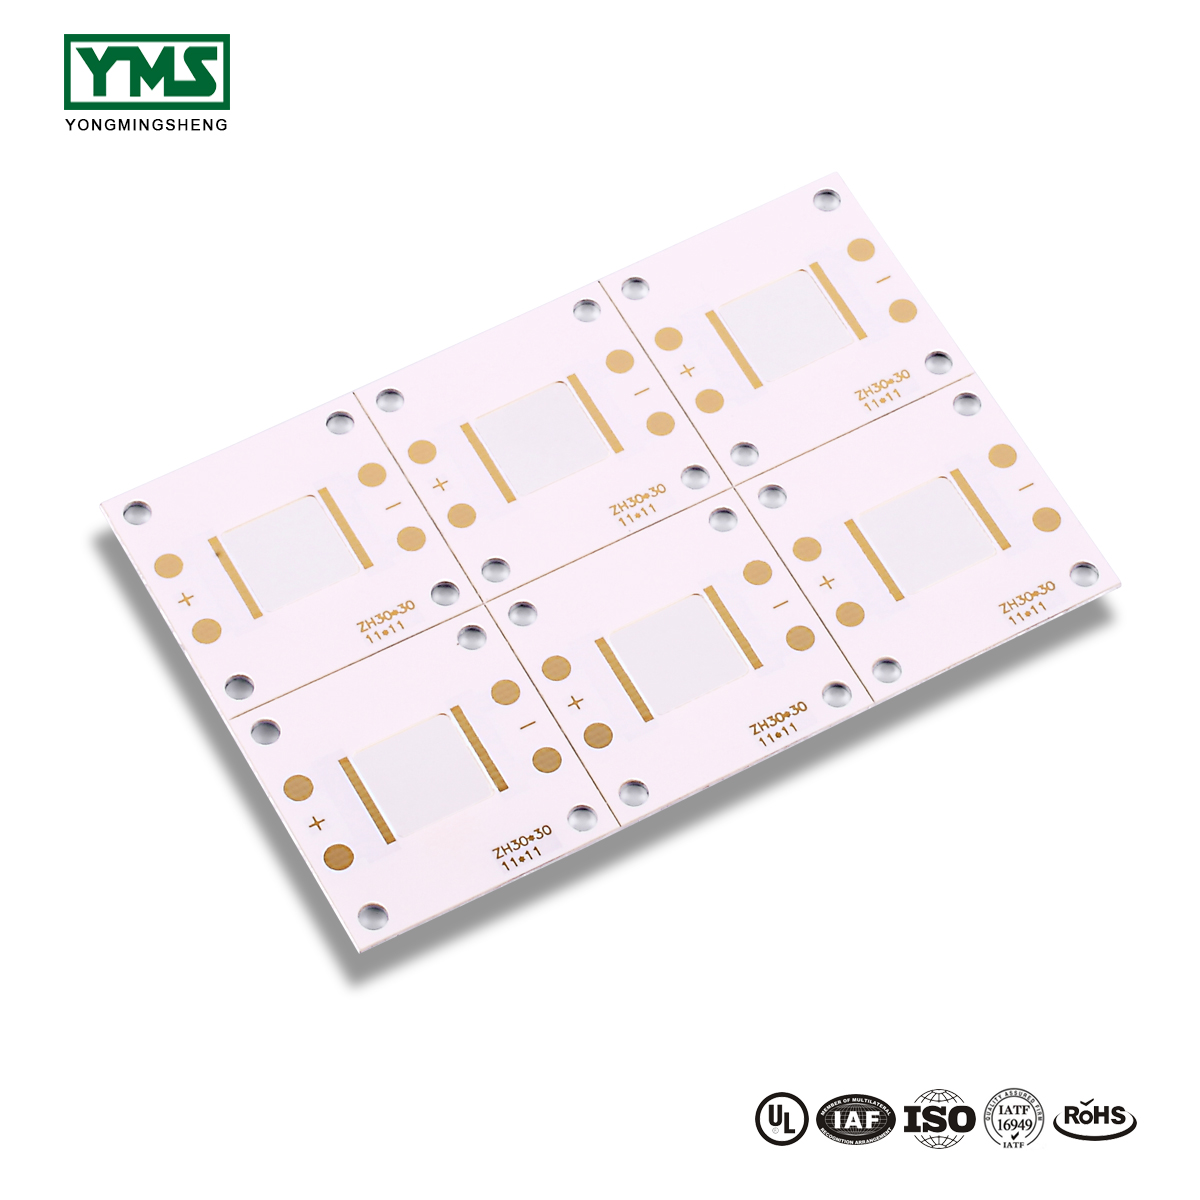 Manufacturer for Special Rogers Hdi Pcb Board - 1Layer mirror Aluminum Base Board | YMSPCB – Yongmingsheng